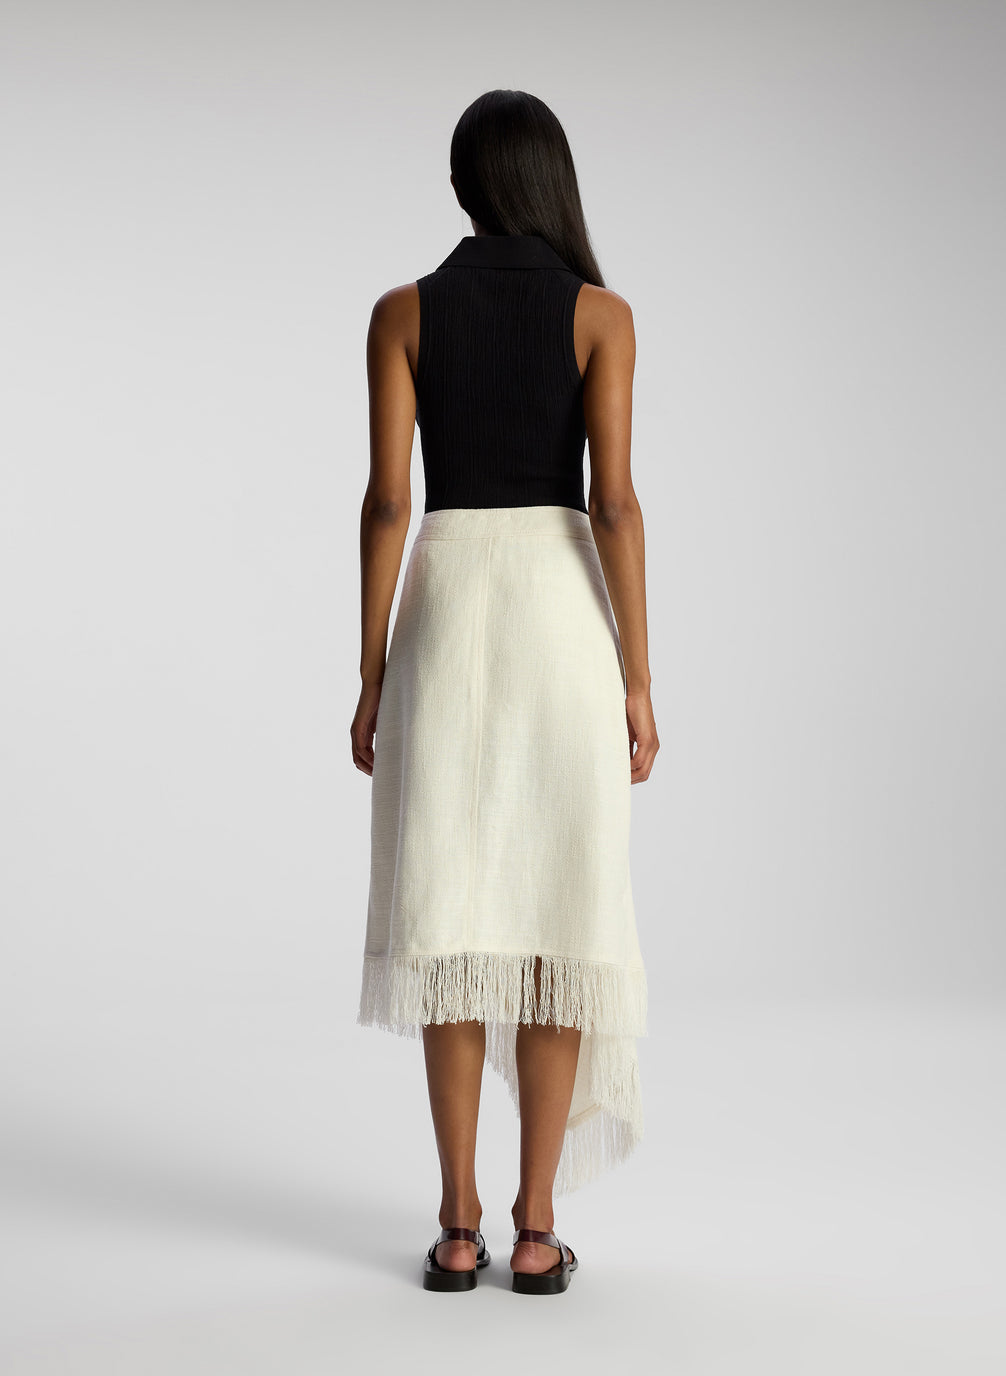 back view of woman wearing black collared sleeveless shirt and white skirt